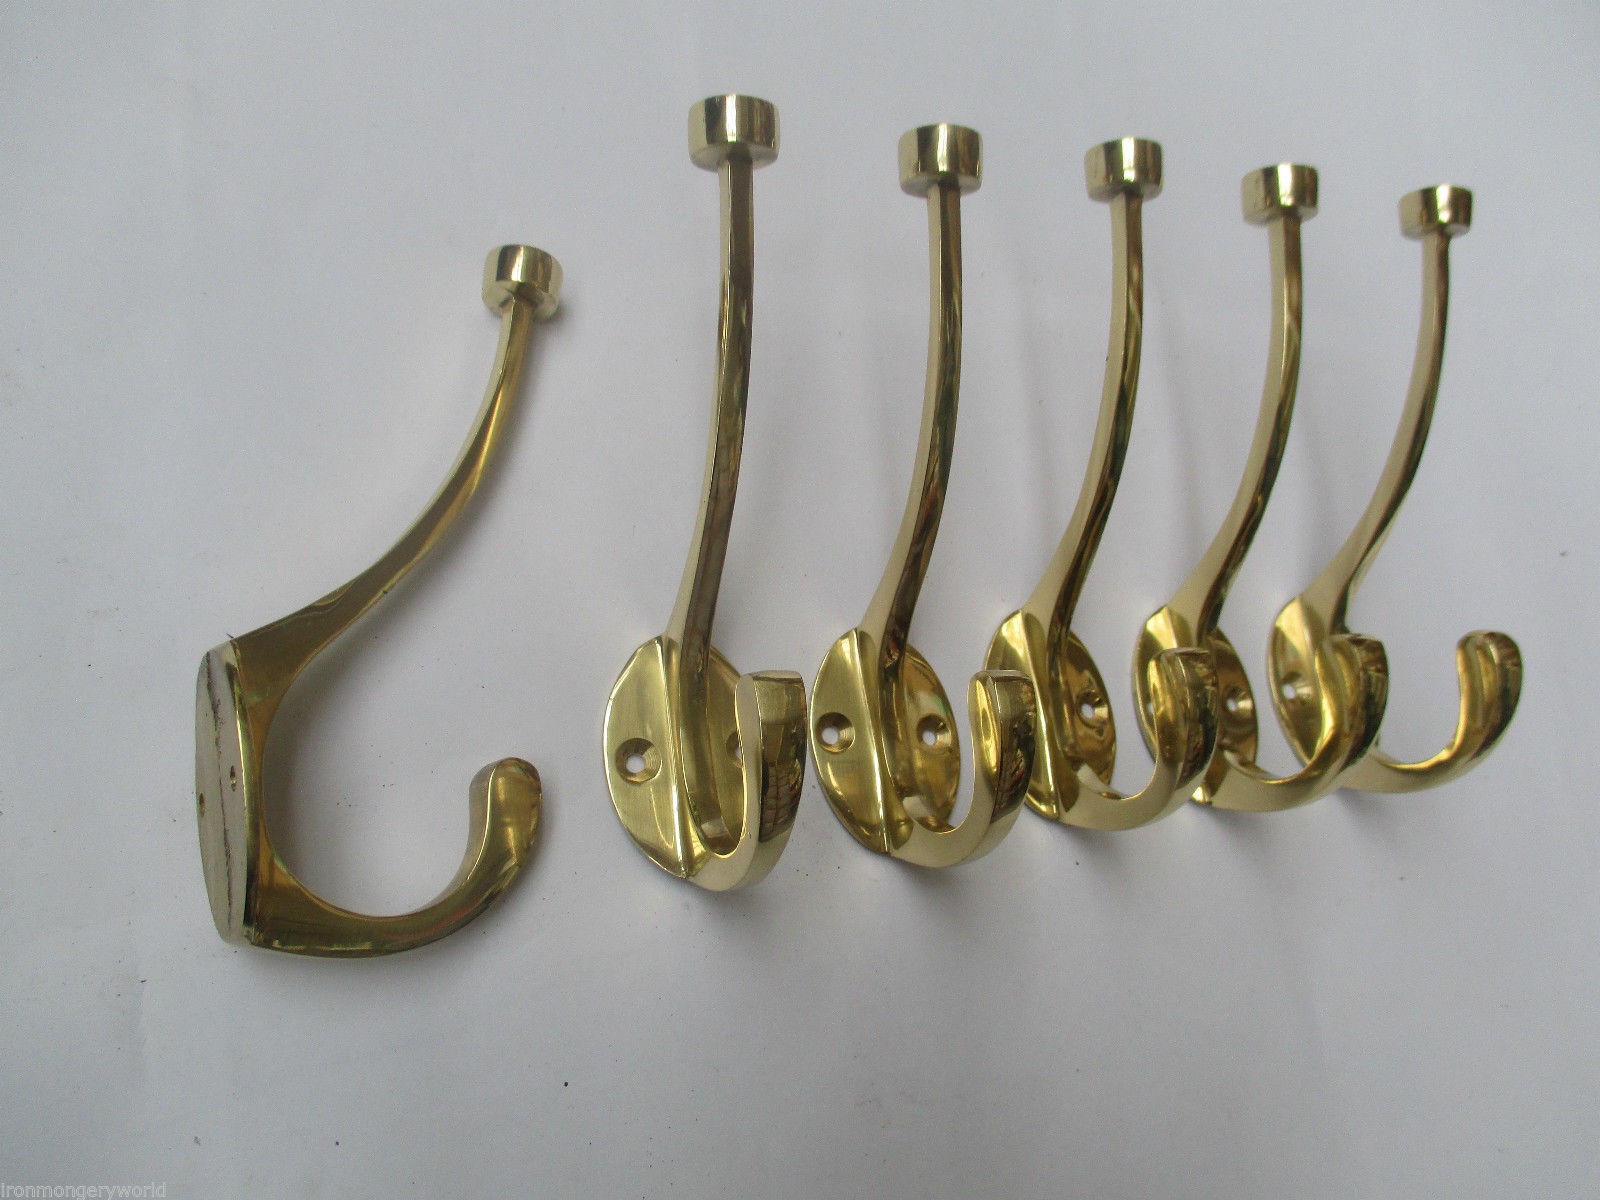 6 X TRADITIONAL VICTORIAN STYLE LARGE HAT AND COAT HOOK DOUBLE COAT HANGING  HOOK- POLISHED BRASS